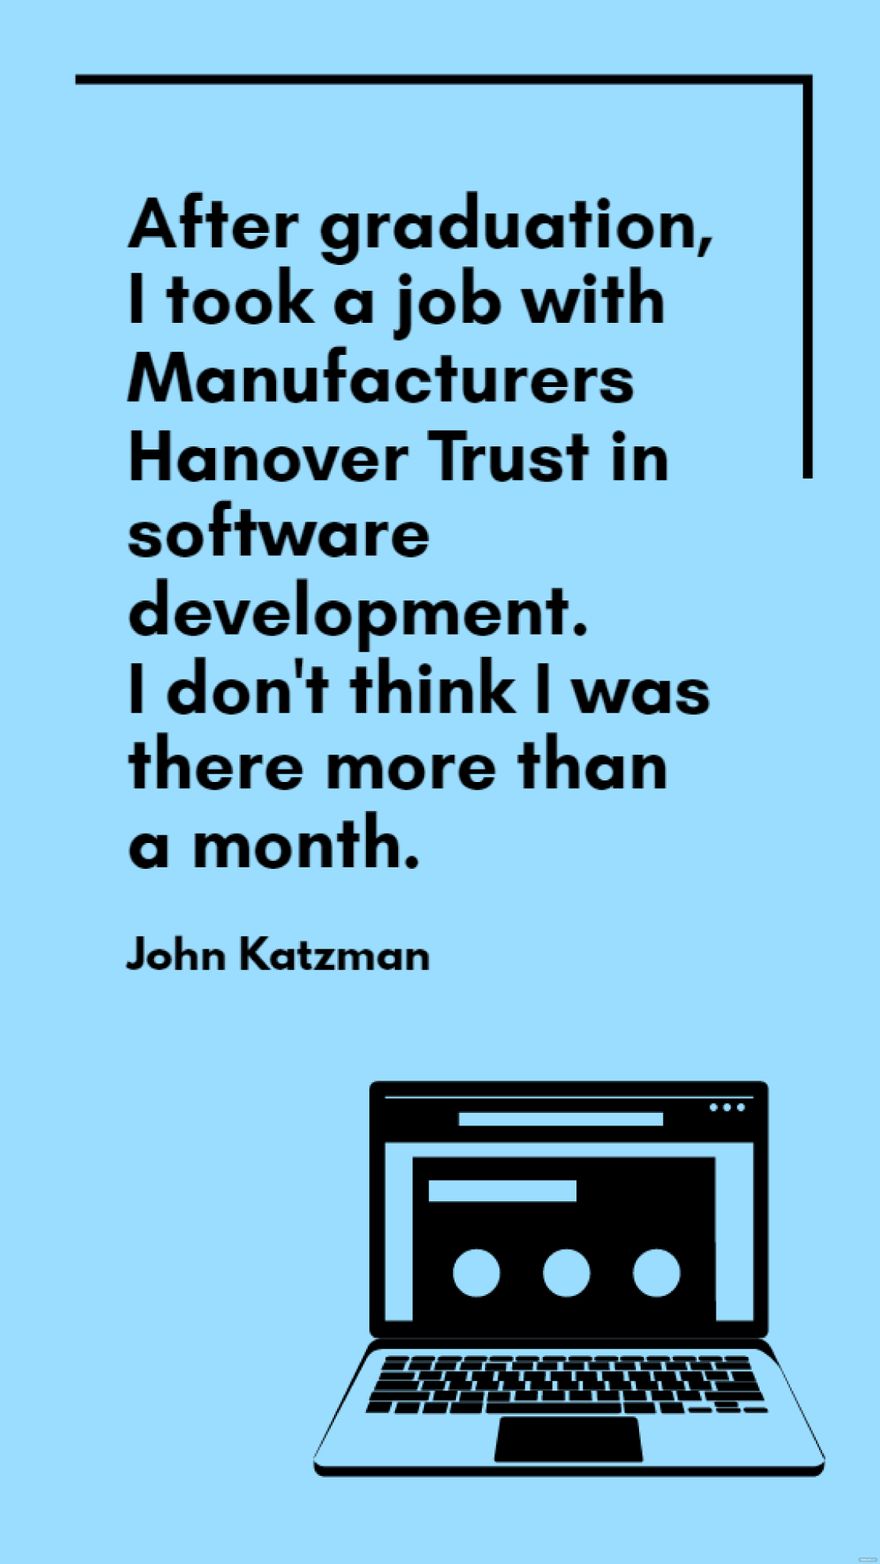 Free John Katzman - After graduation, I took a job with Manufacturers Hanover Trust in software development. I don't think I was there more than a month. in JPG